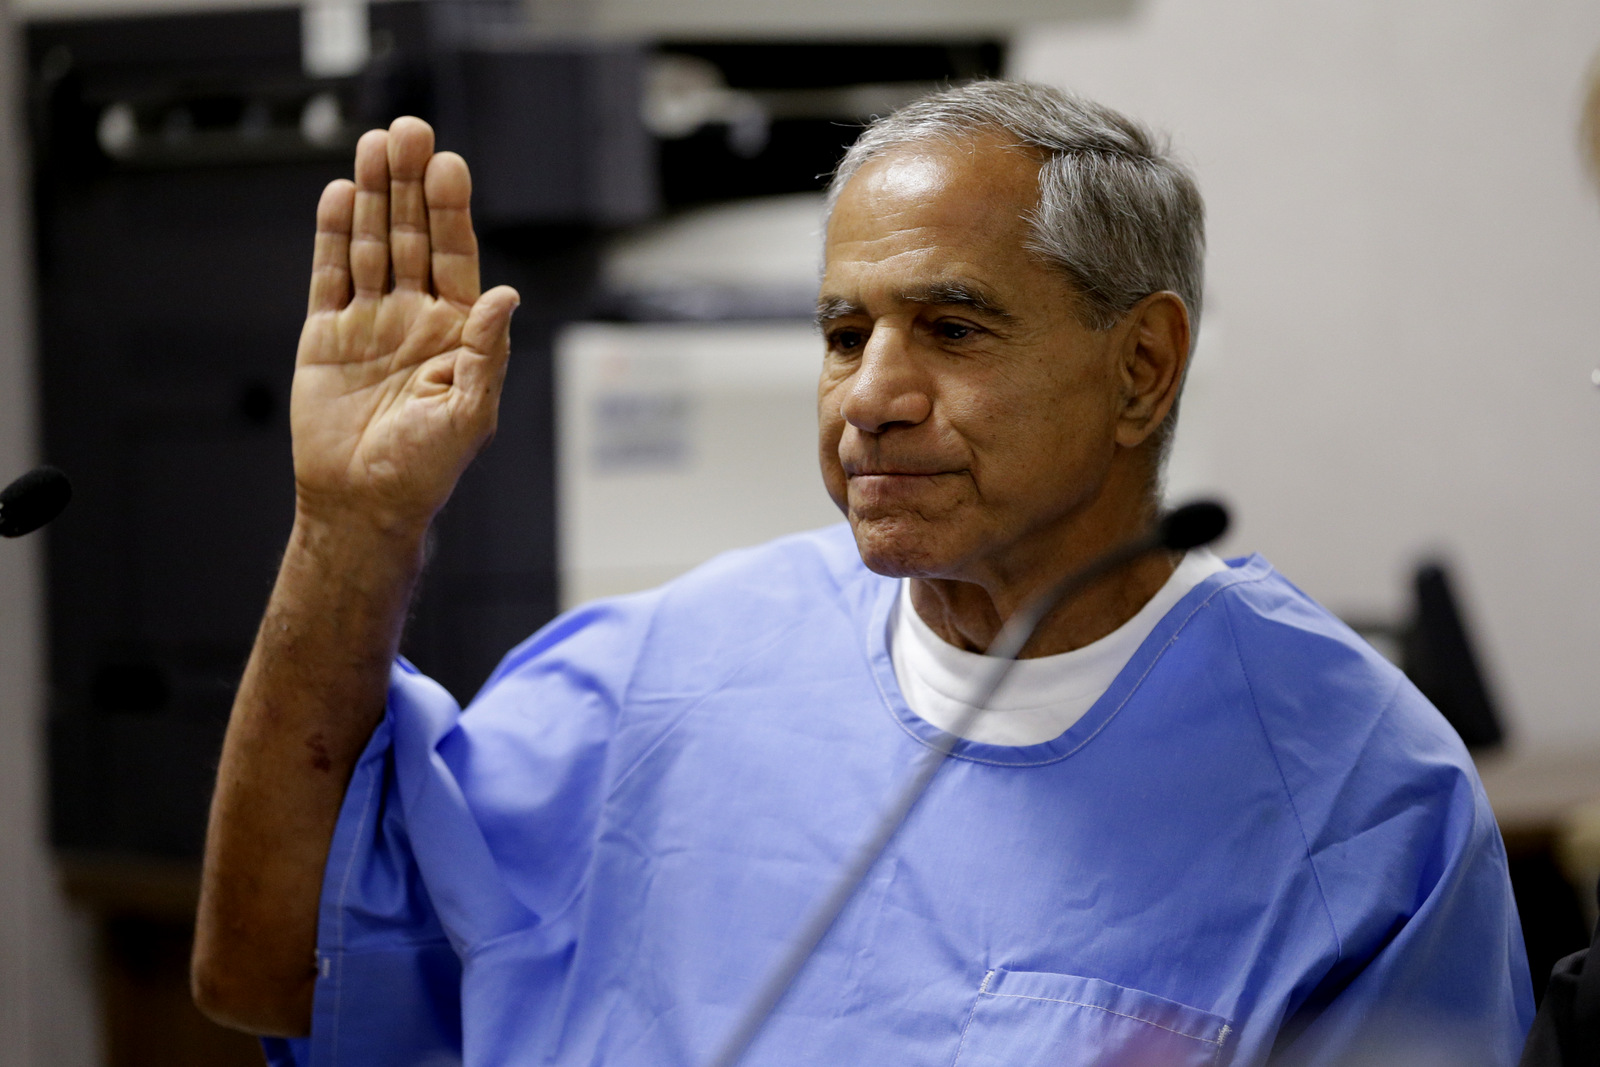 Sirhan Sirhan is sworn in during a parole hearing, Feb. 10, 2016, at the Richard J. Donovan Correctional Facility in San Diego. Gregory Bull | AP